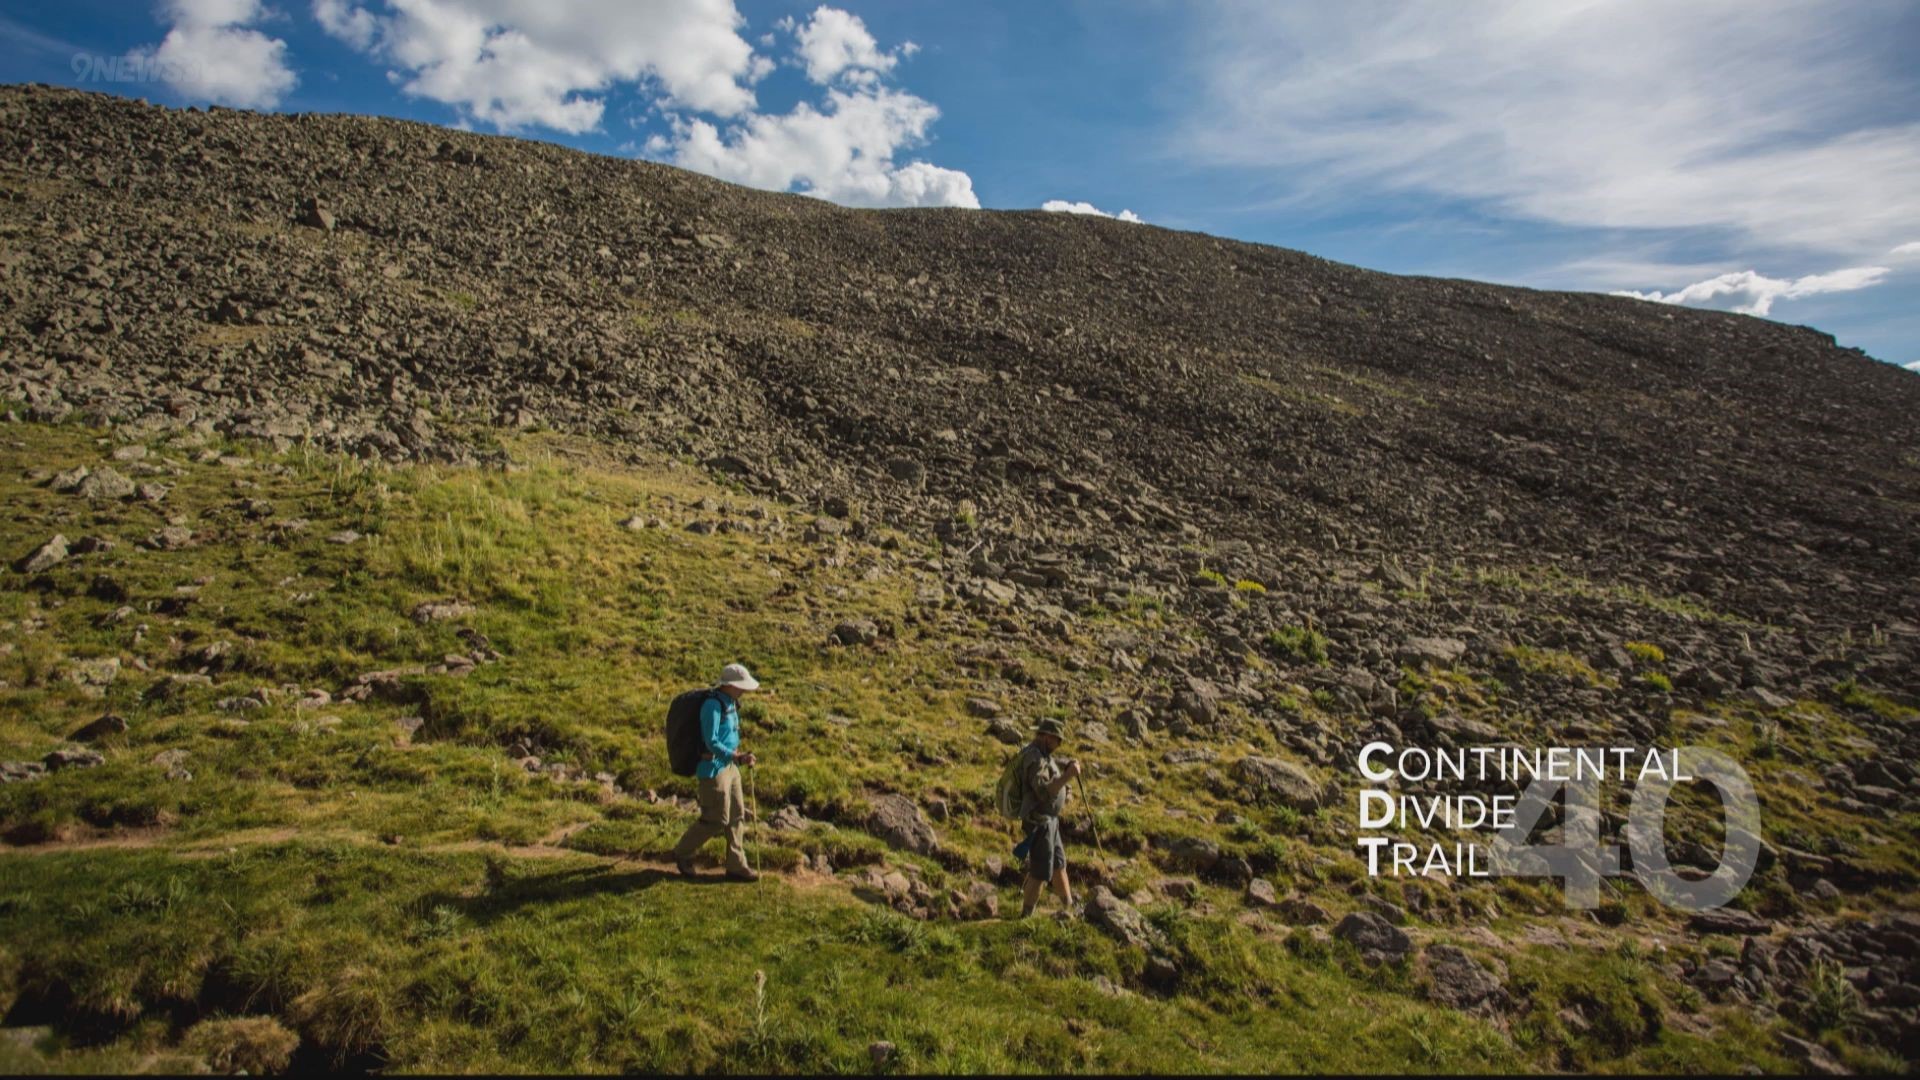 9NEWS Photojournalist Chris Hansen spent more than a week on the Continental Divide Trail in Colorado. Here are some of the stories he discovered along the way.